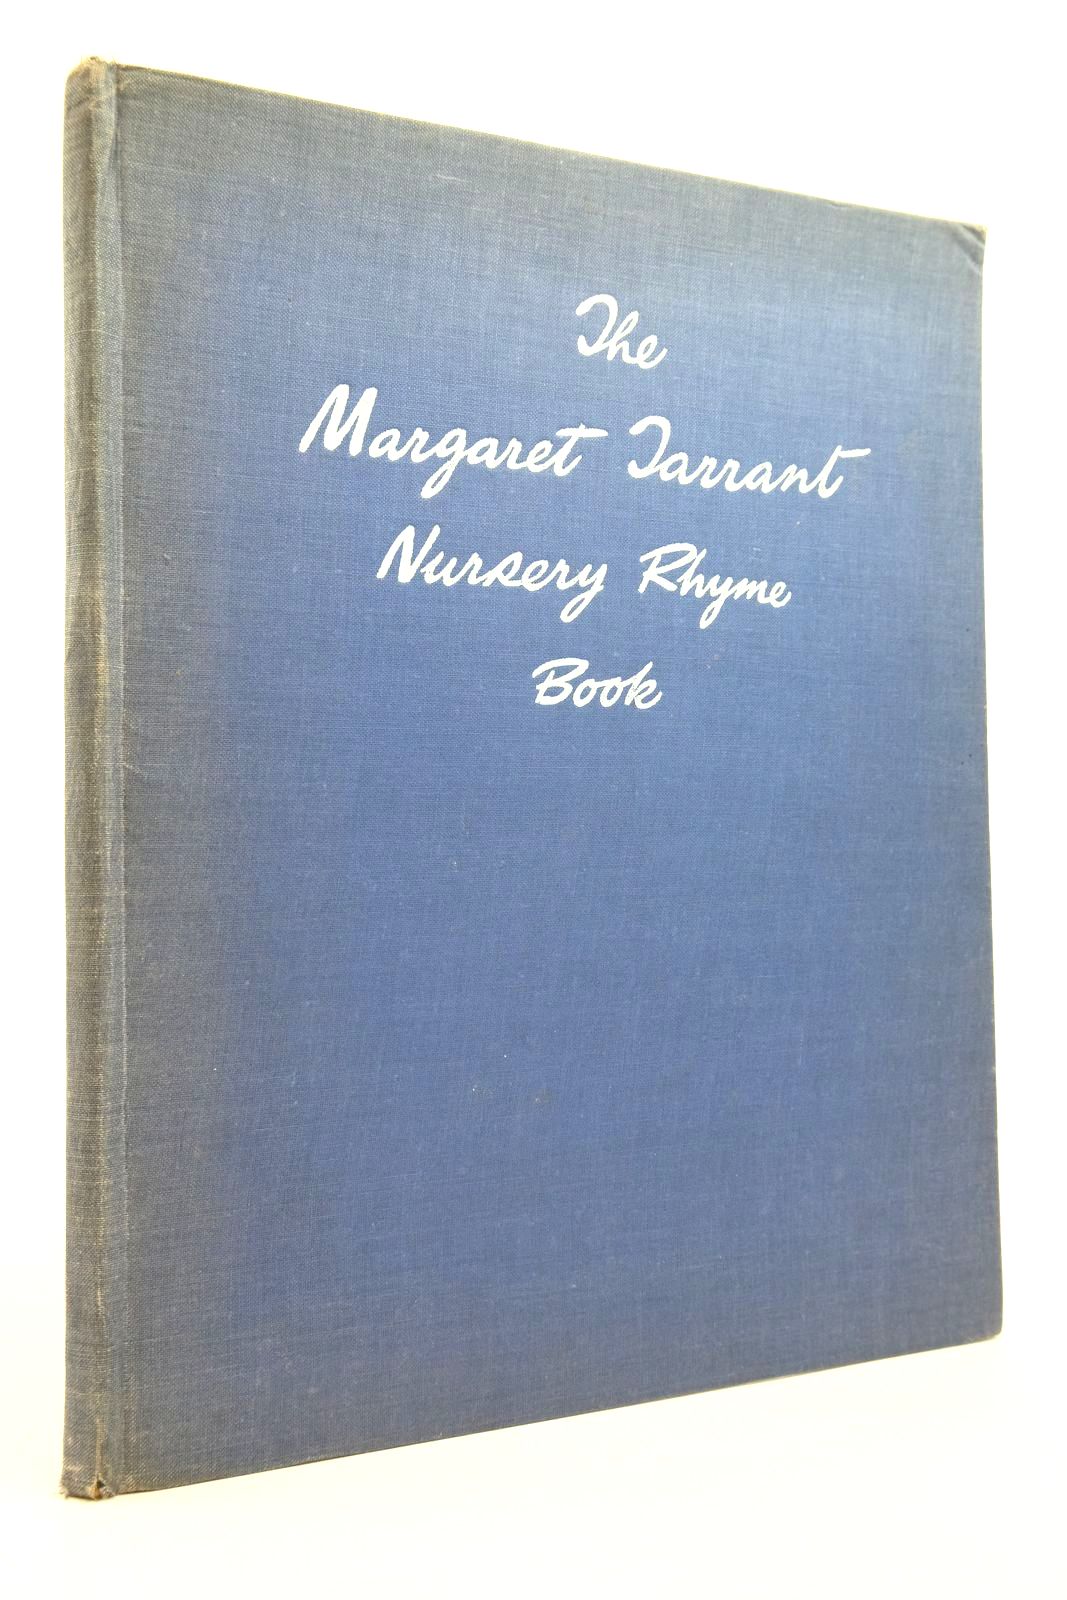 Photo of THE MARGARET TARRANT NURSERY RHYME BOOK illustrated by Tarrant, Margaret published by Collins (STOCK CODE: 2140075)  for sale by Stella & Rose's Books